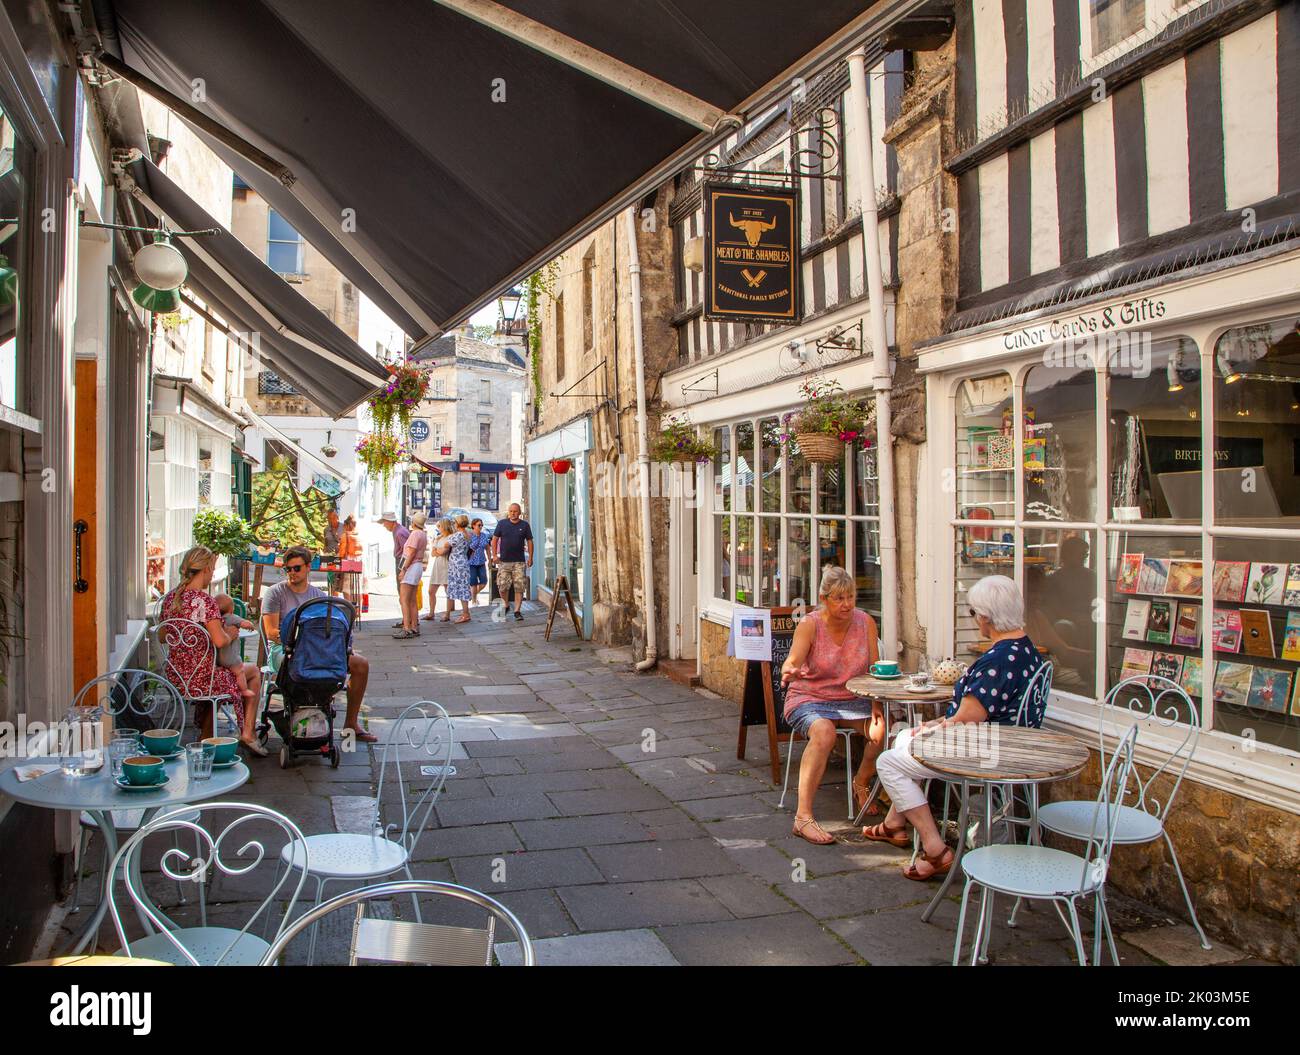 People sitting eating and drinking at cafes in the Shambles in the Wiltshire market town of Bradford on Avon Stock Photo